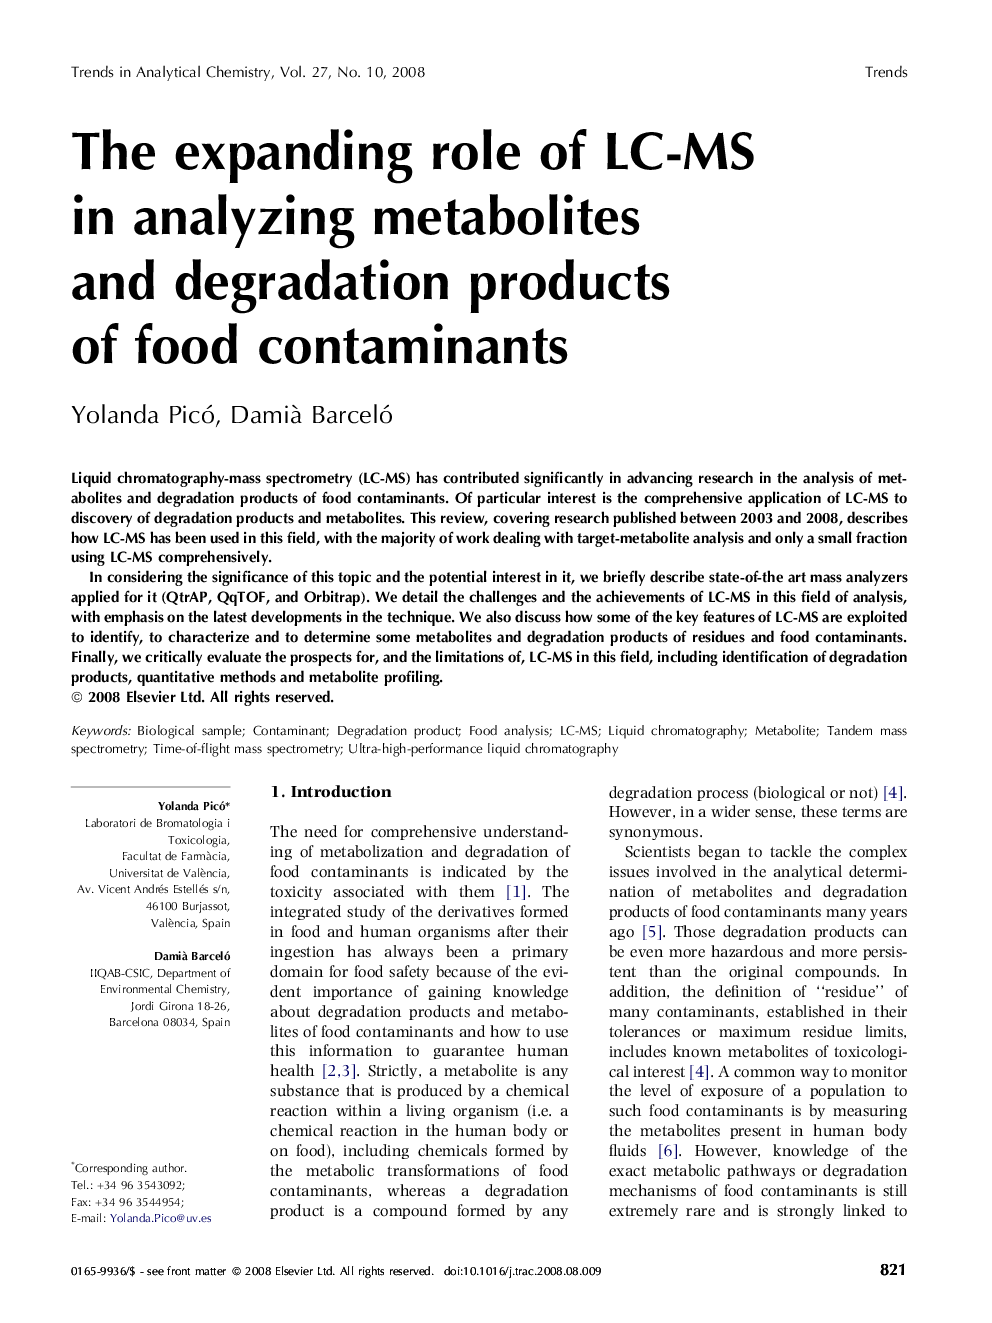 The expanding role of LC-MS in analyzing metabolites and degradation products of food contaminants